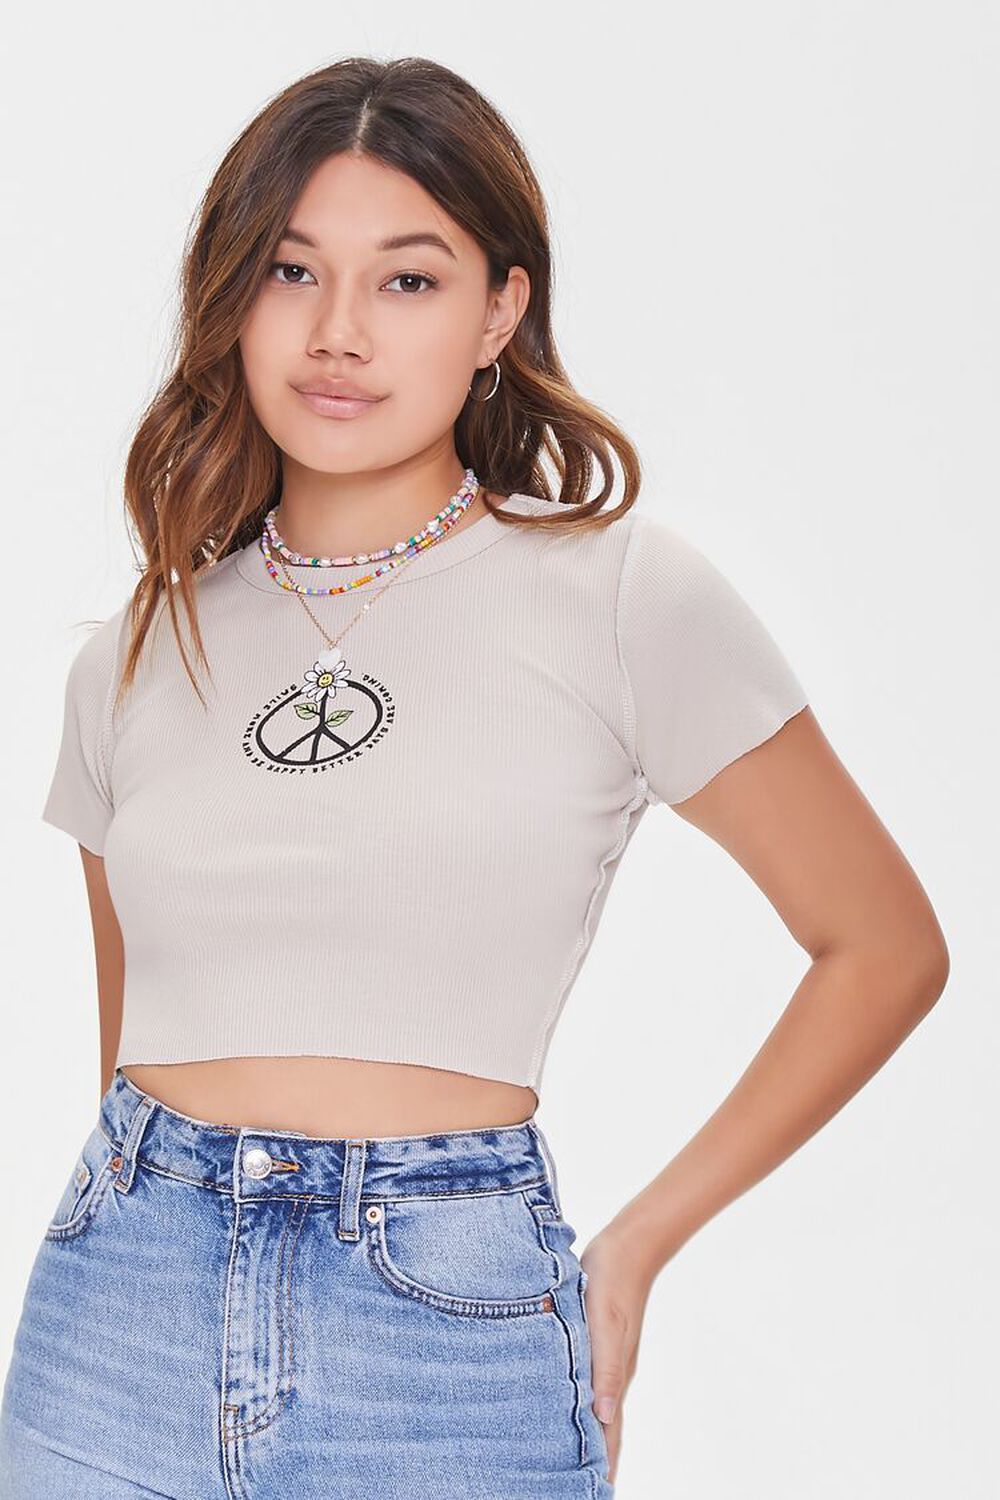 Women's Crop Tops, Cropped Blouses, Cropped Tees & More